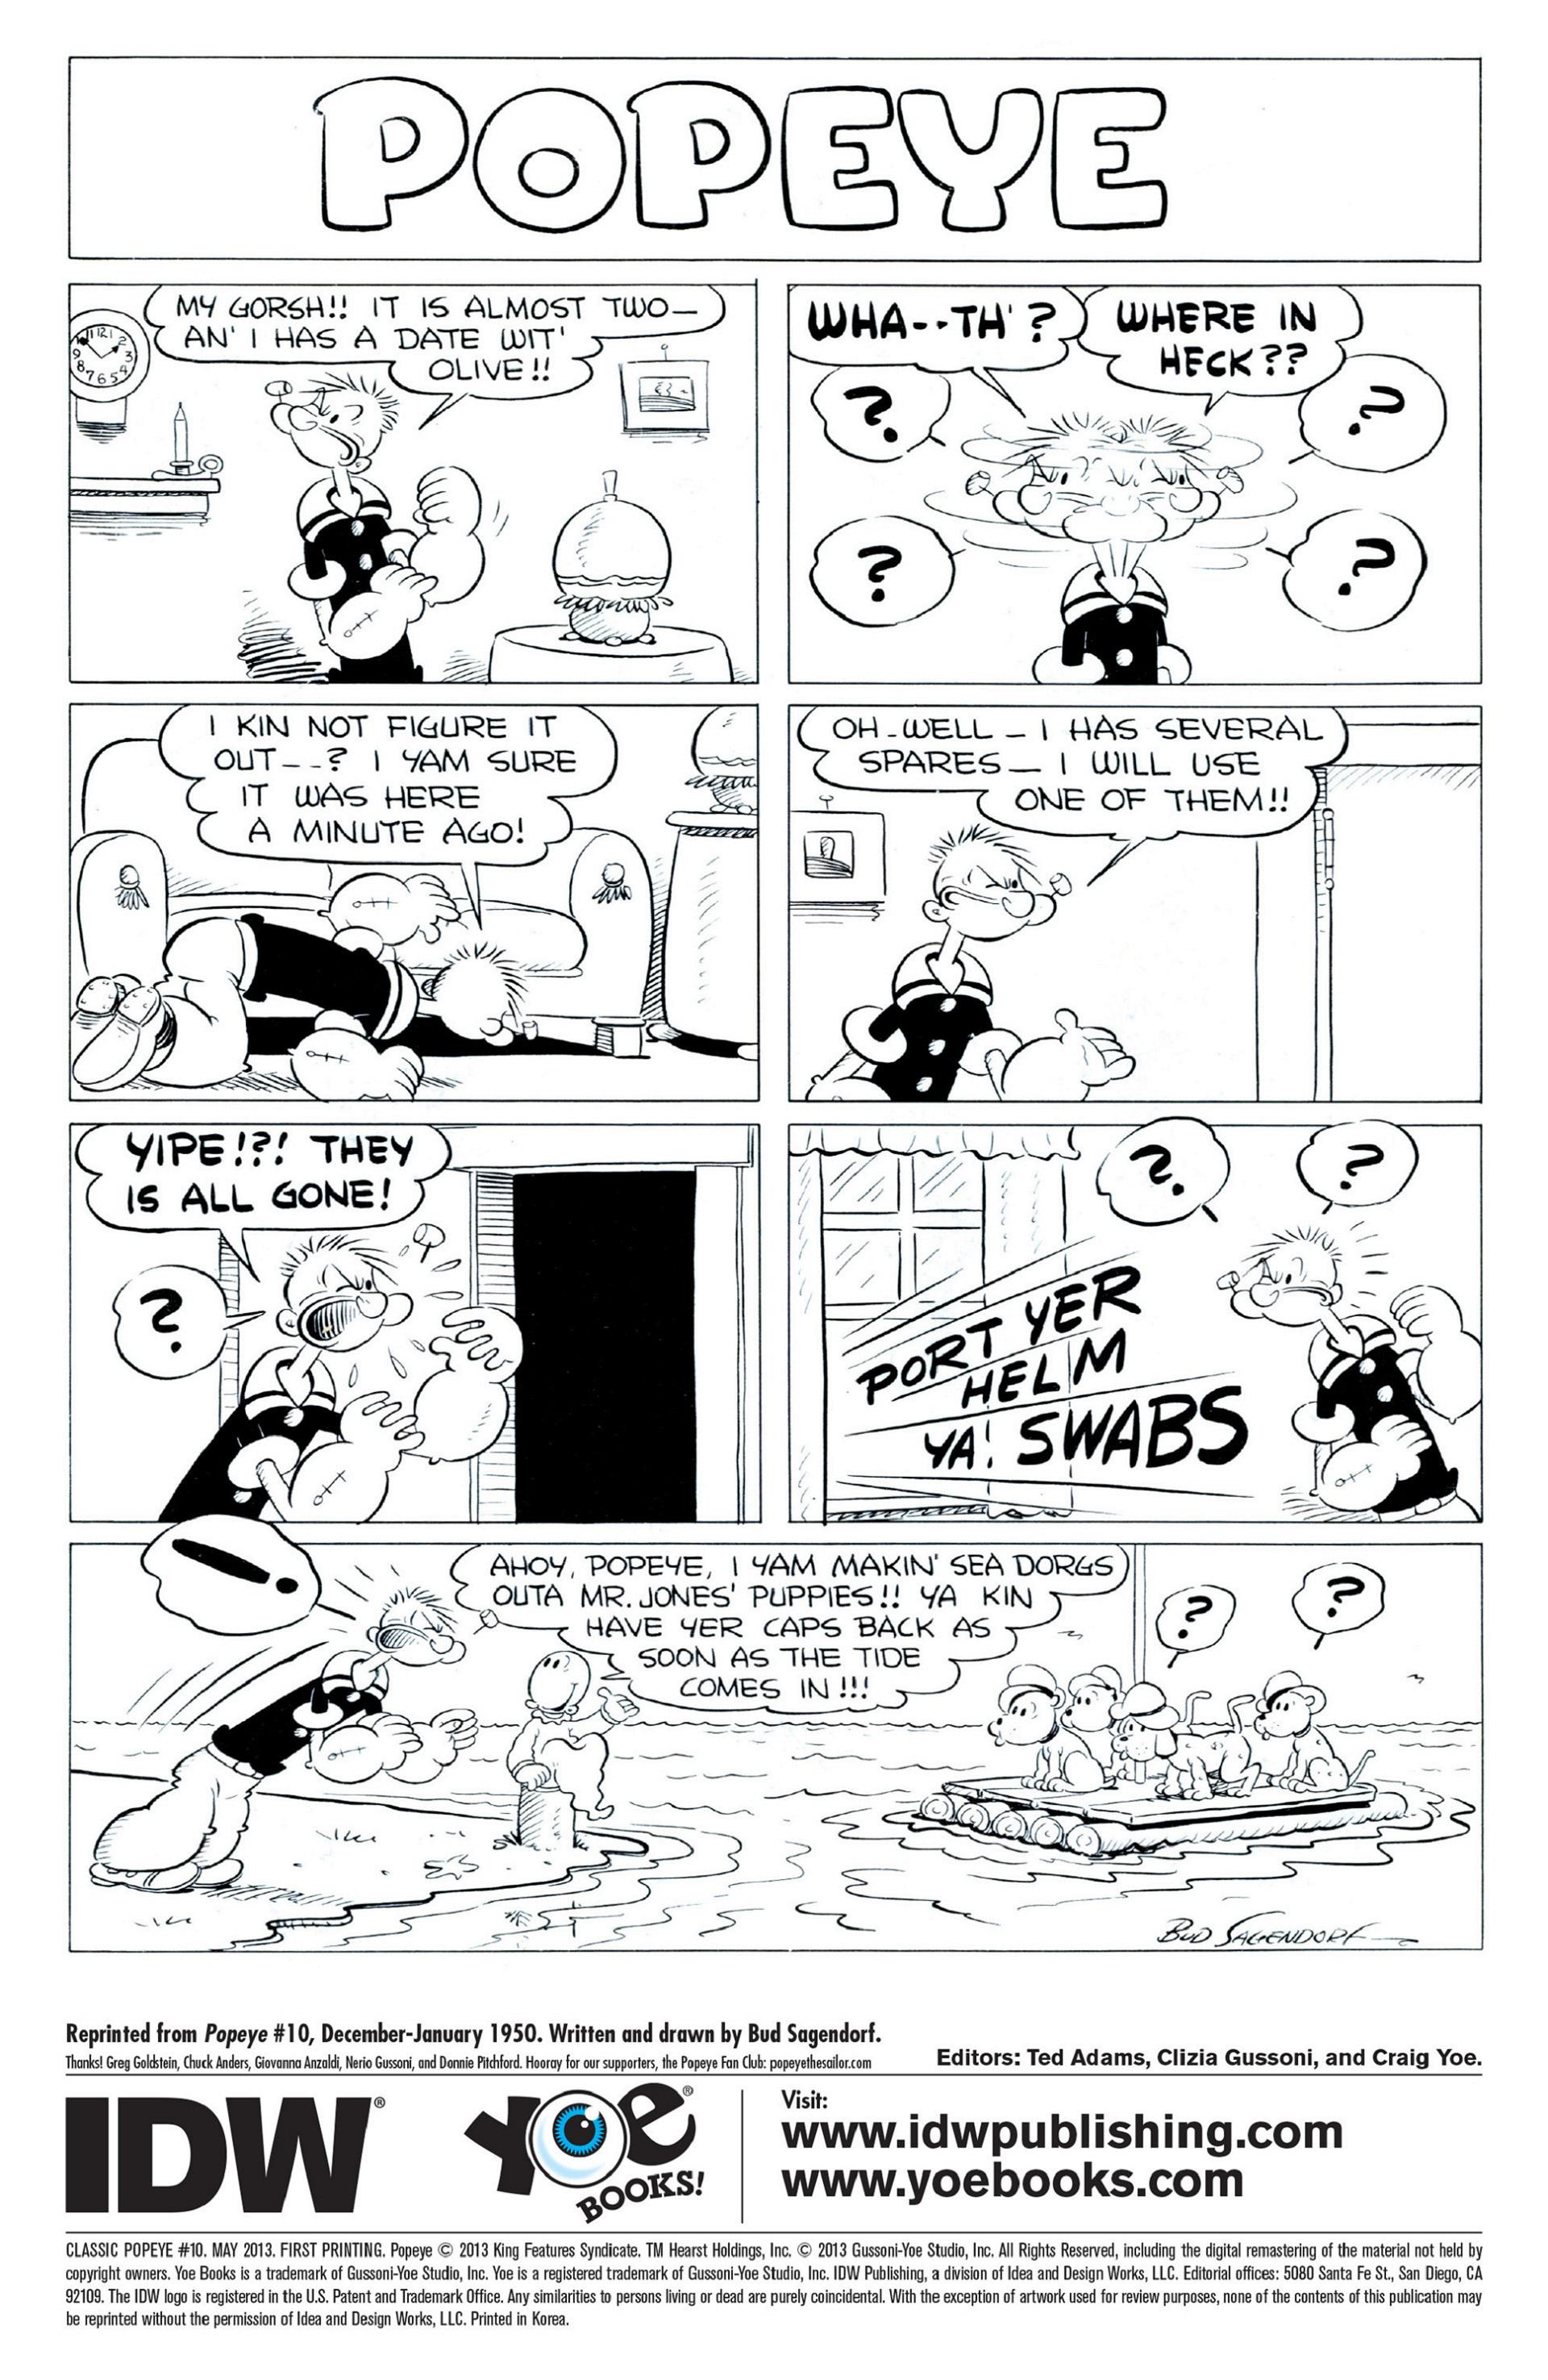 Read online Classic Popeye comic -  Issue #10 - 2